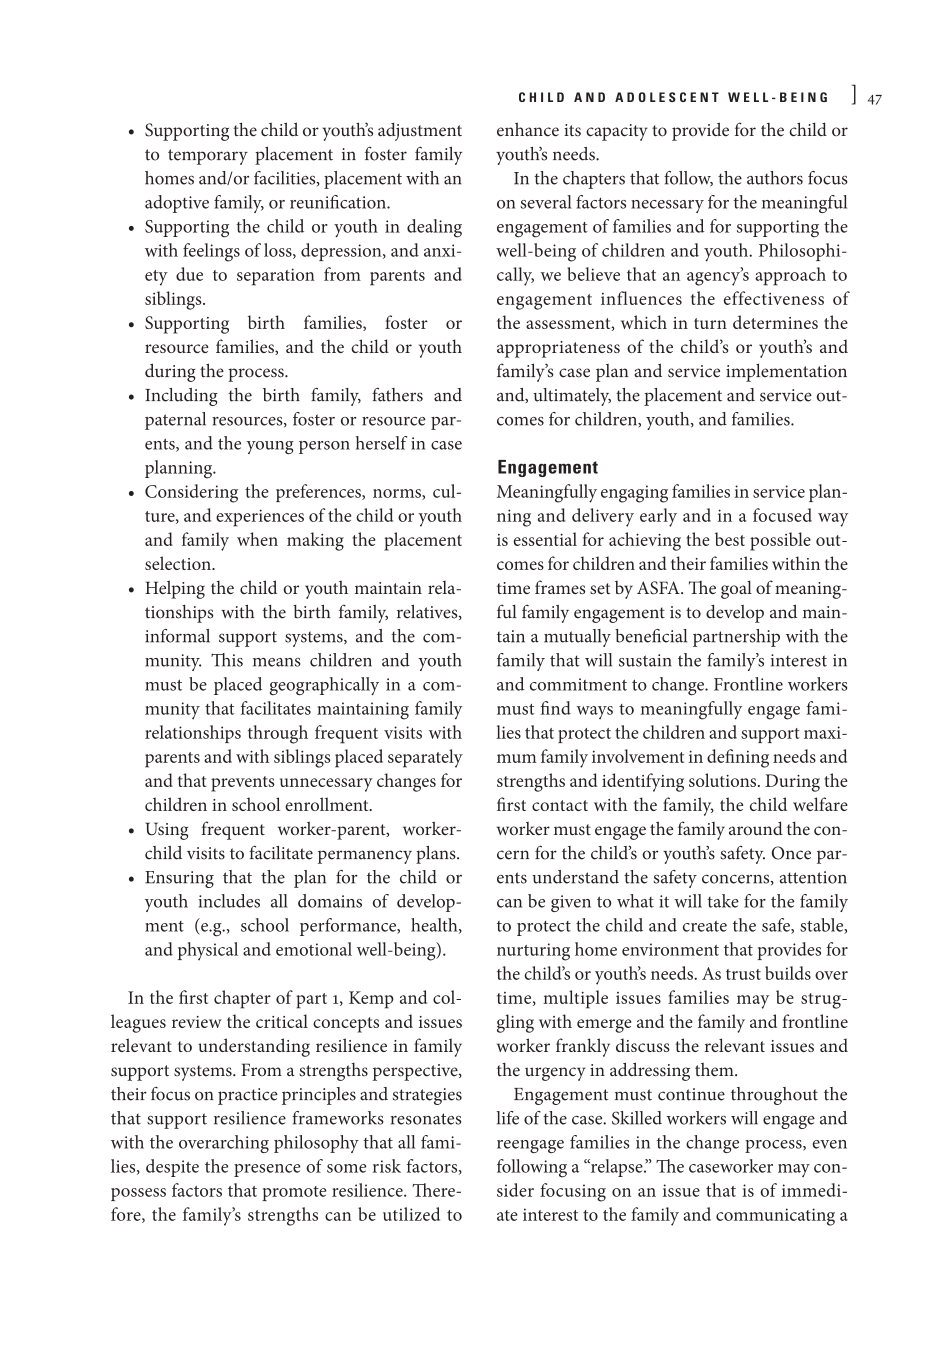 Child Welfare for the Twenty-first Century: A Handbook of Practices, Policies, and Programs, second edition page 47